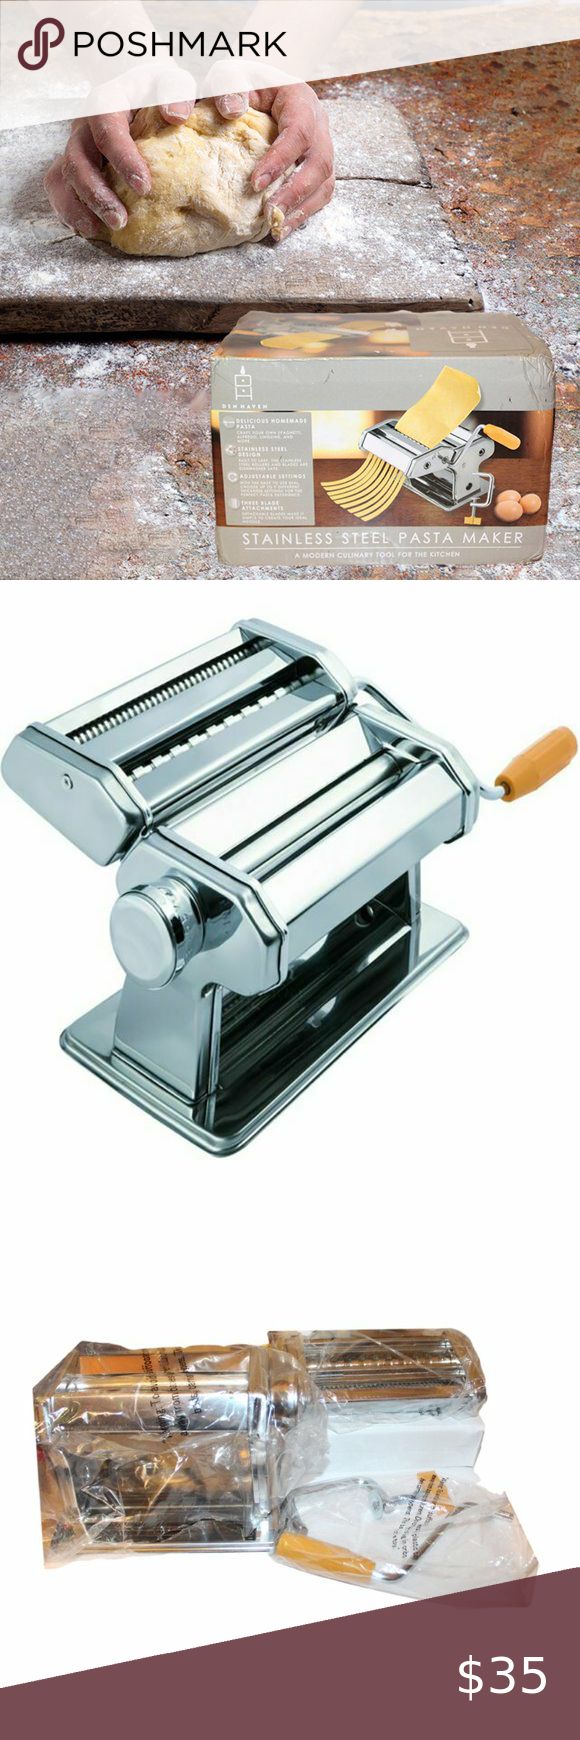 recipe for a stainless steel pasta maker